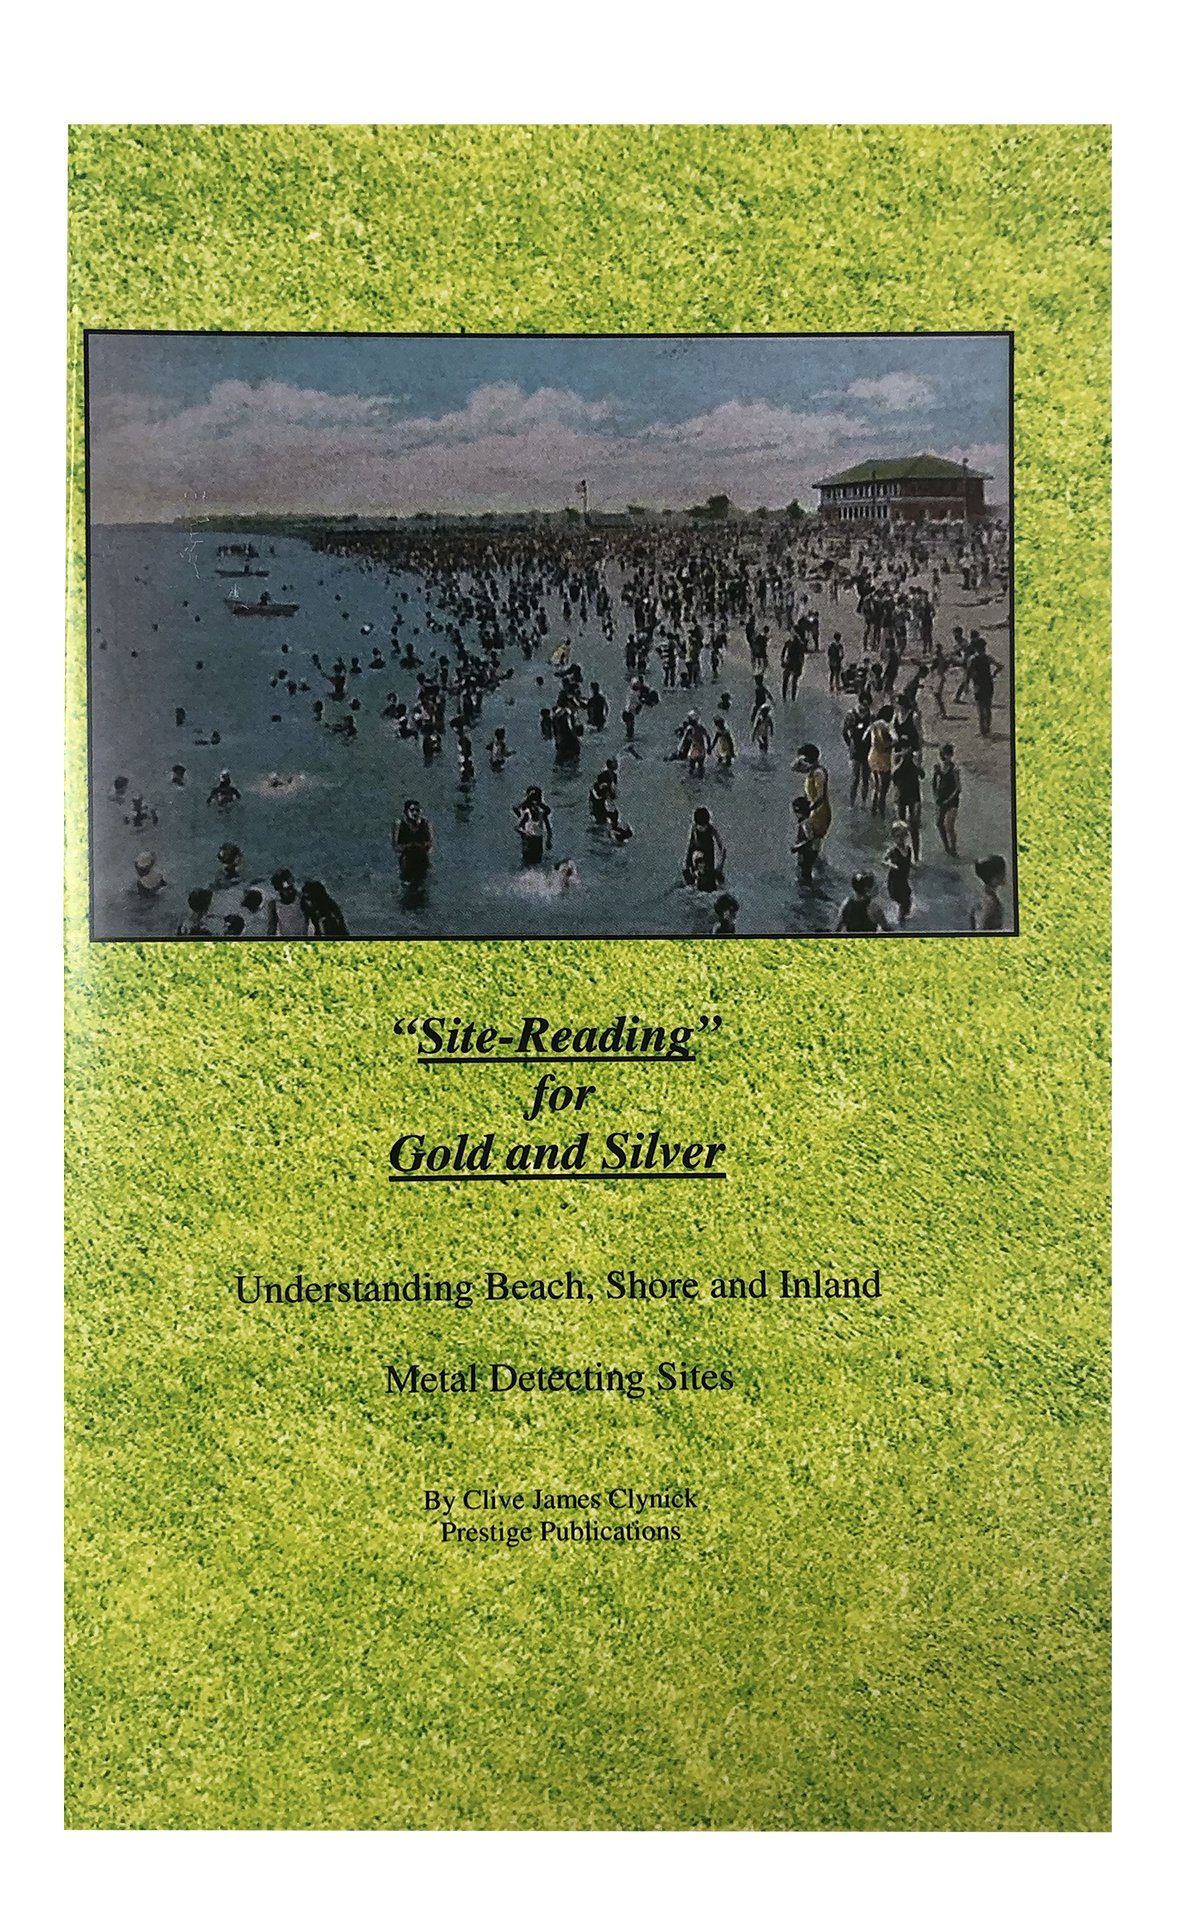 Site-Reading for Gold and Silver By Clive James Clynick Clive James Clynick 